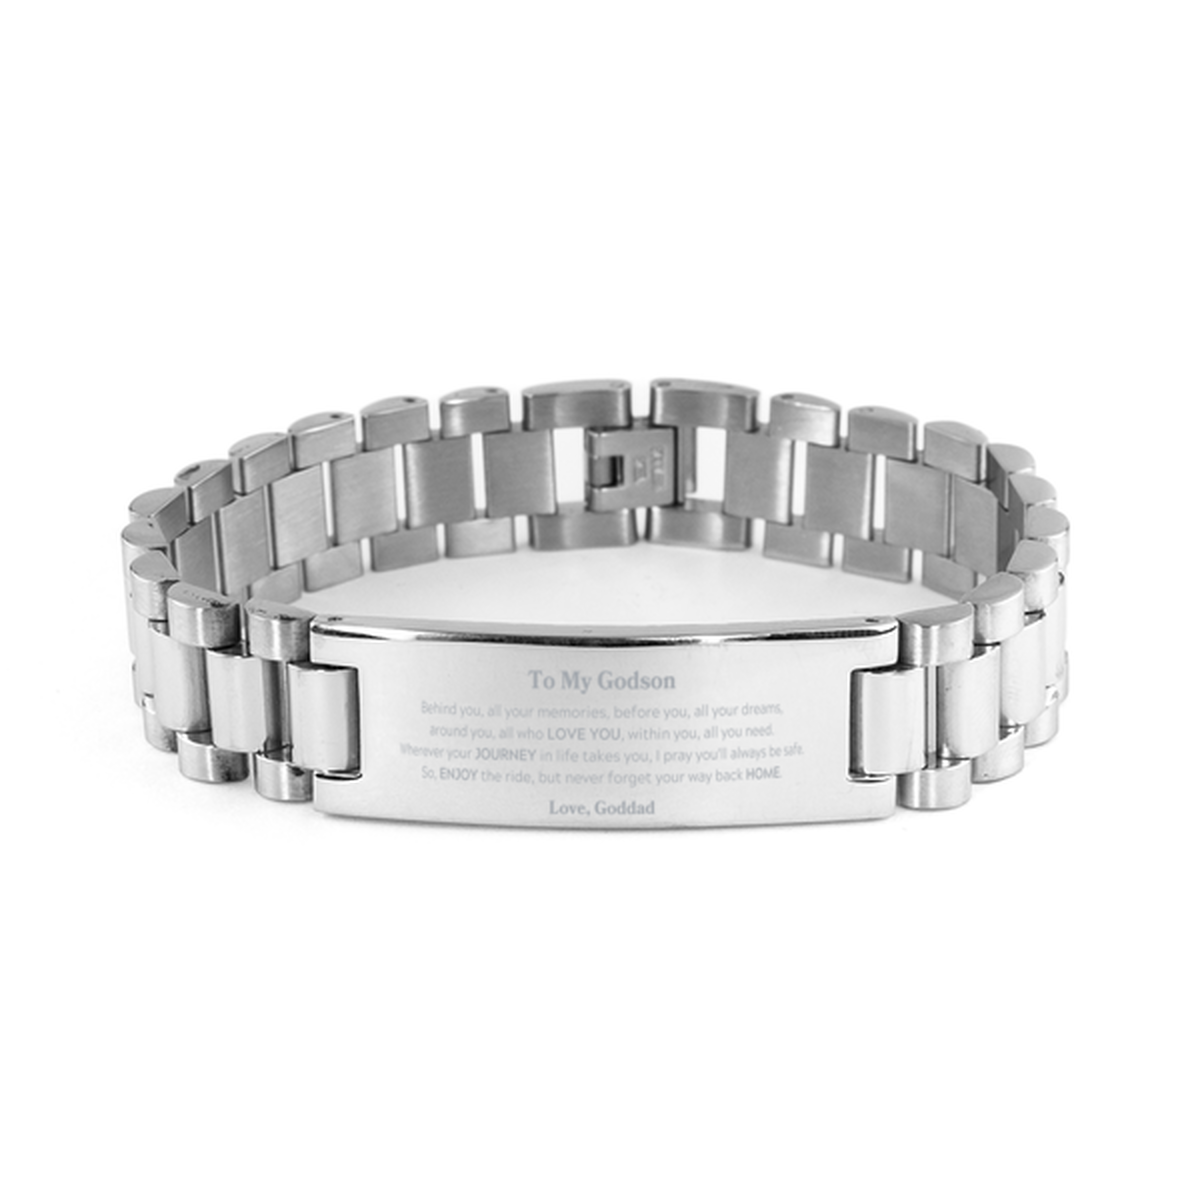 To My Godson Graduation Gifts from Goddad, Godson Ladder Stainless Steel Bracelet Christmas Birthday Gifts for Godson Behind you, all your memories, before you, all your dreams. Love, Goddad